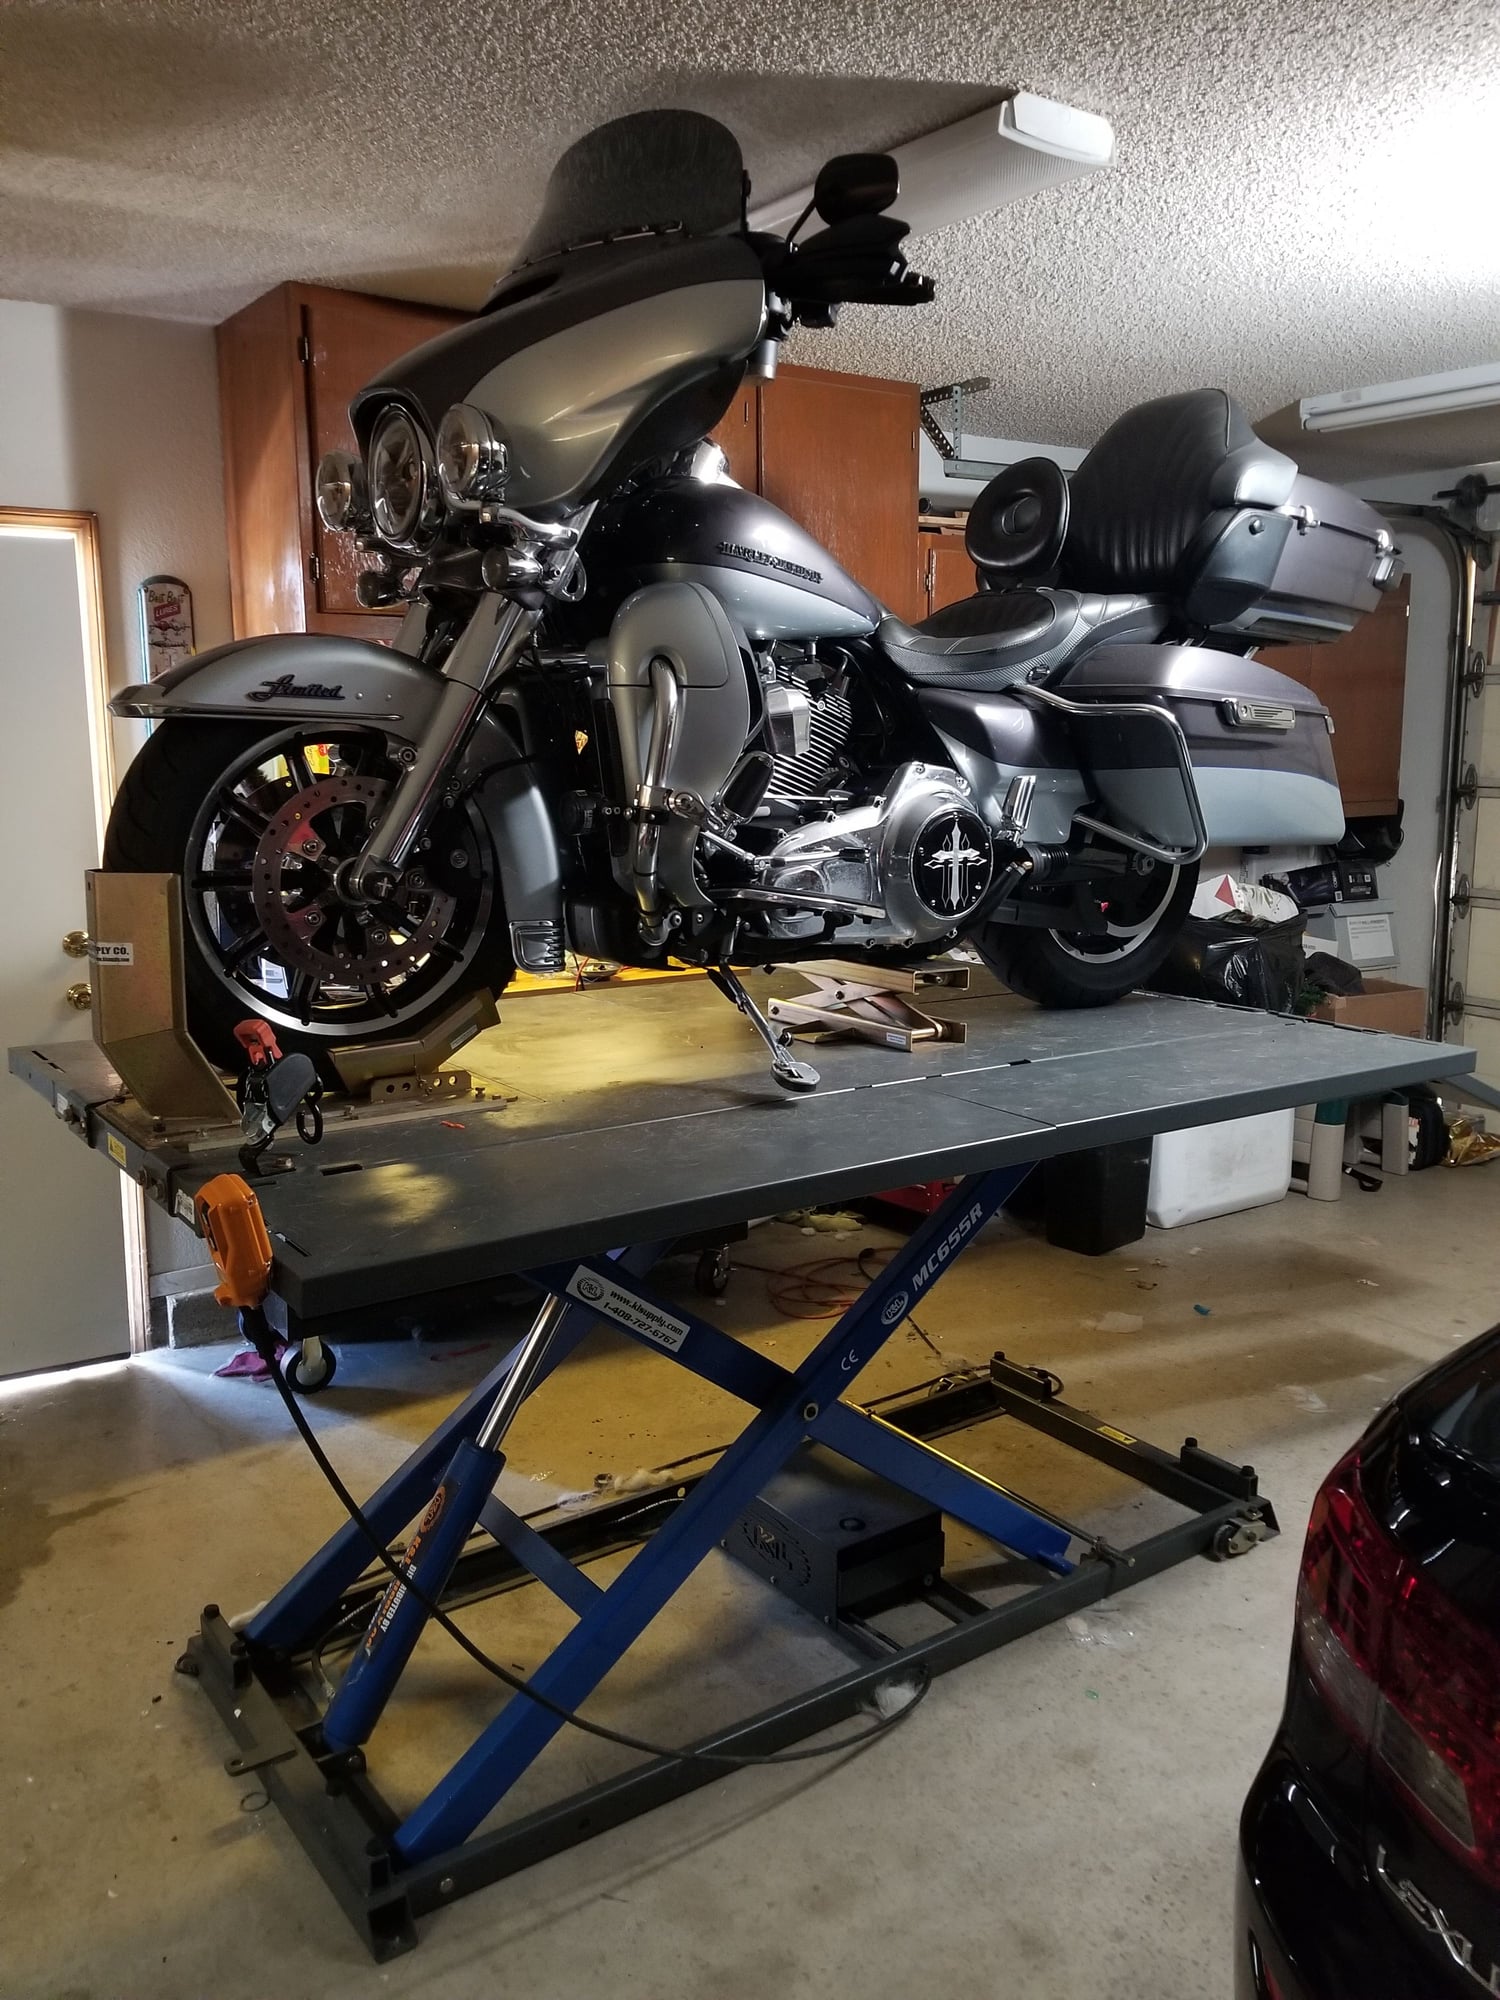 Motorcycle lifts - Page 3 - Harley Davidson Forums